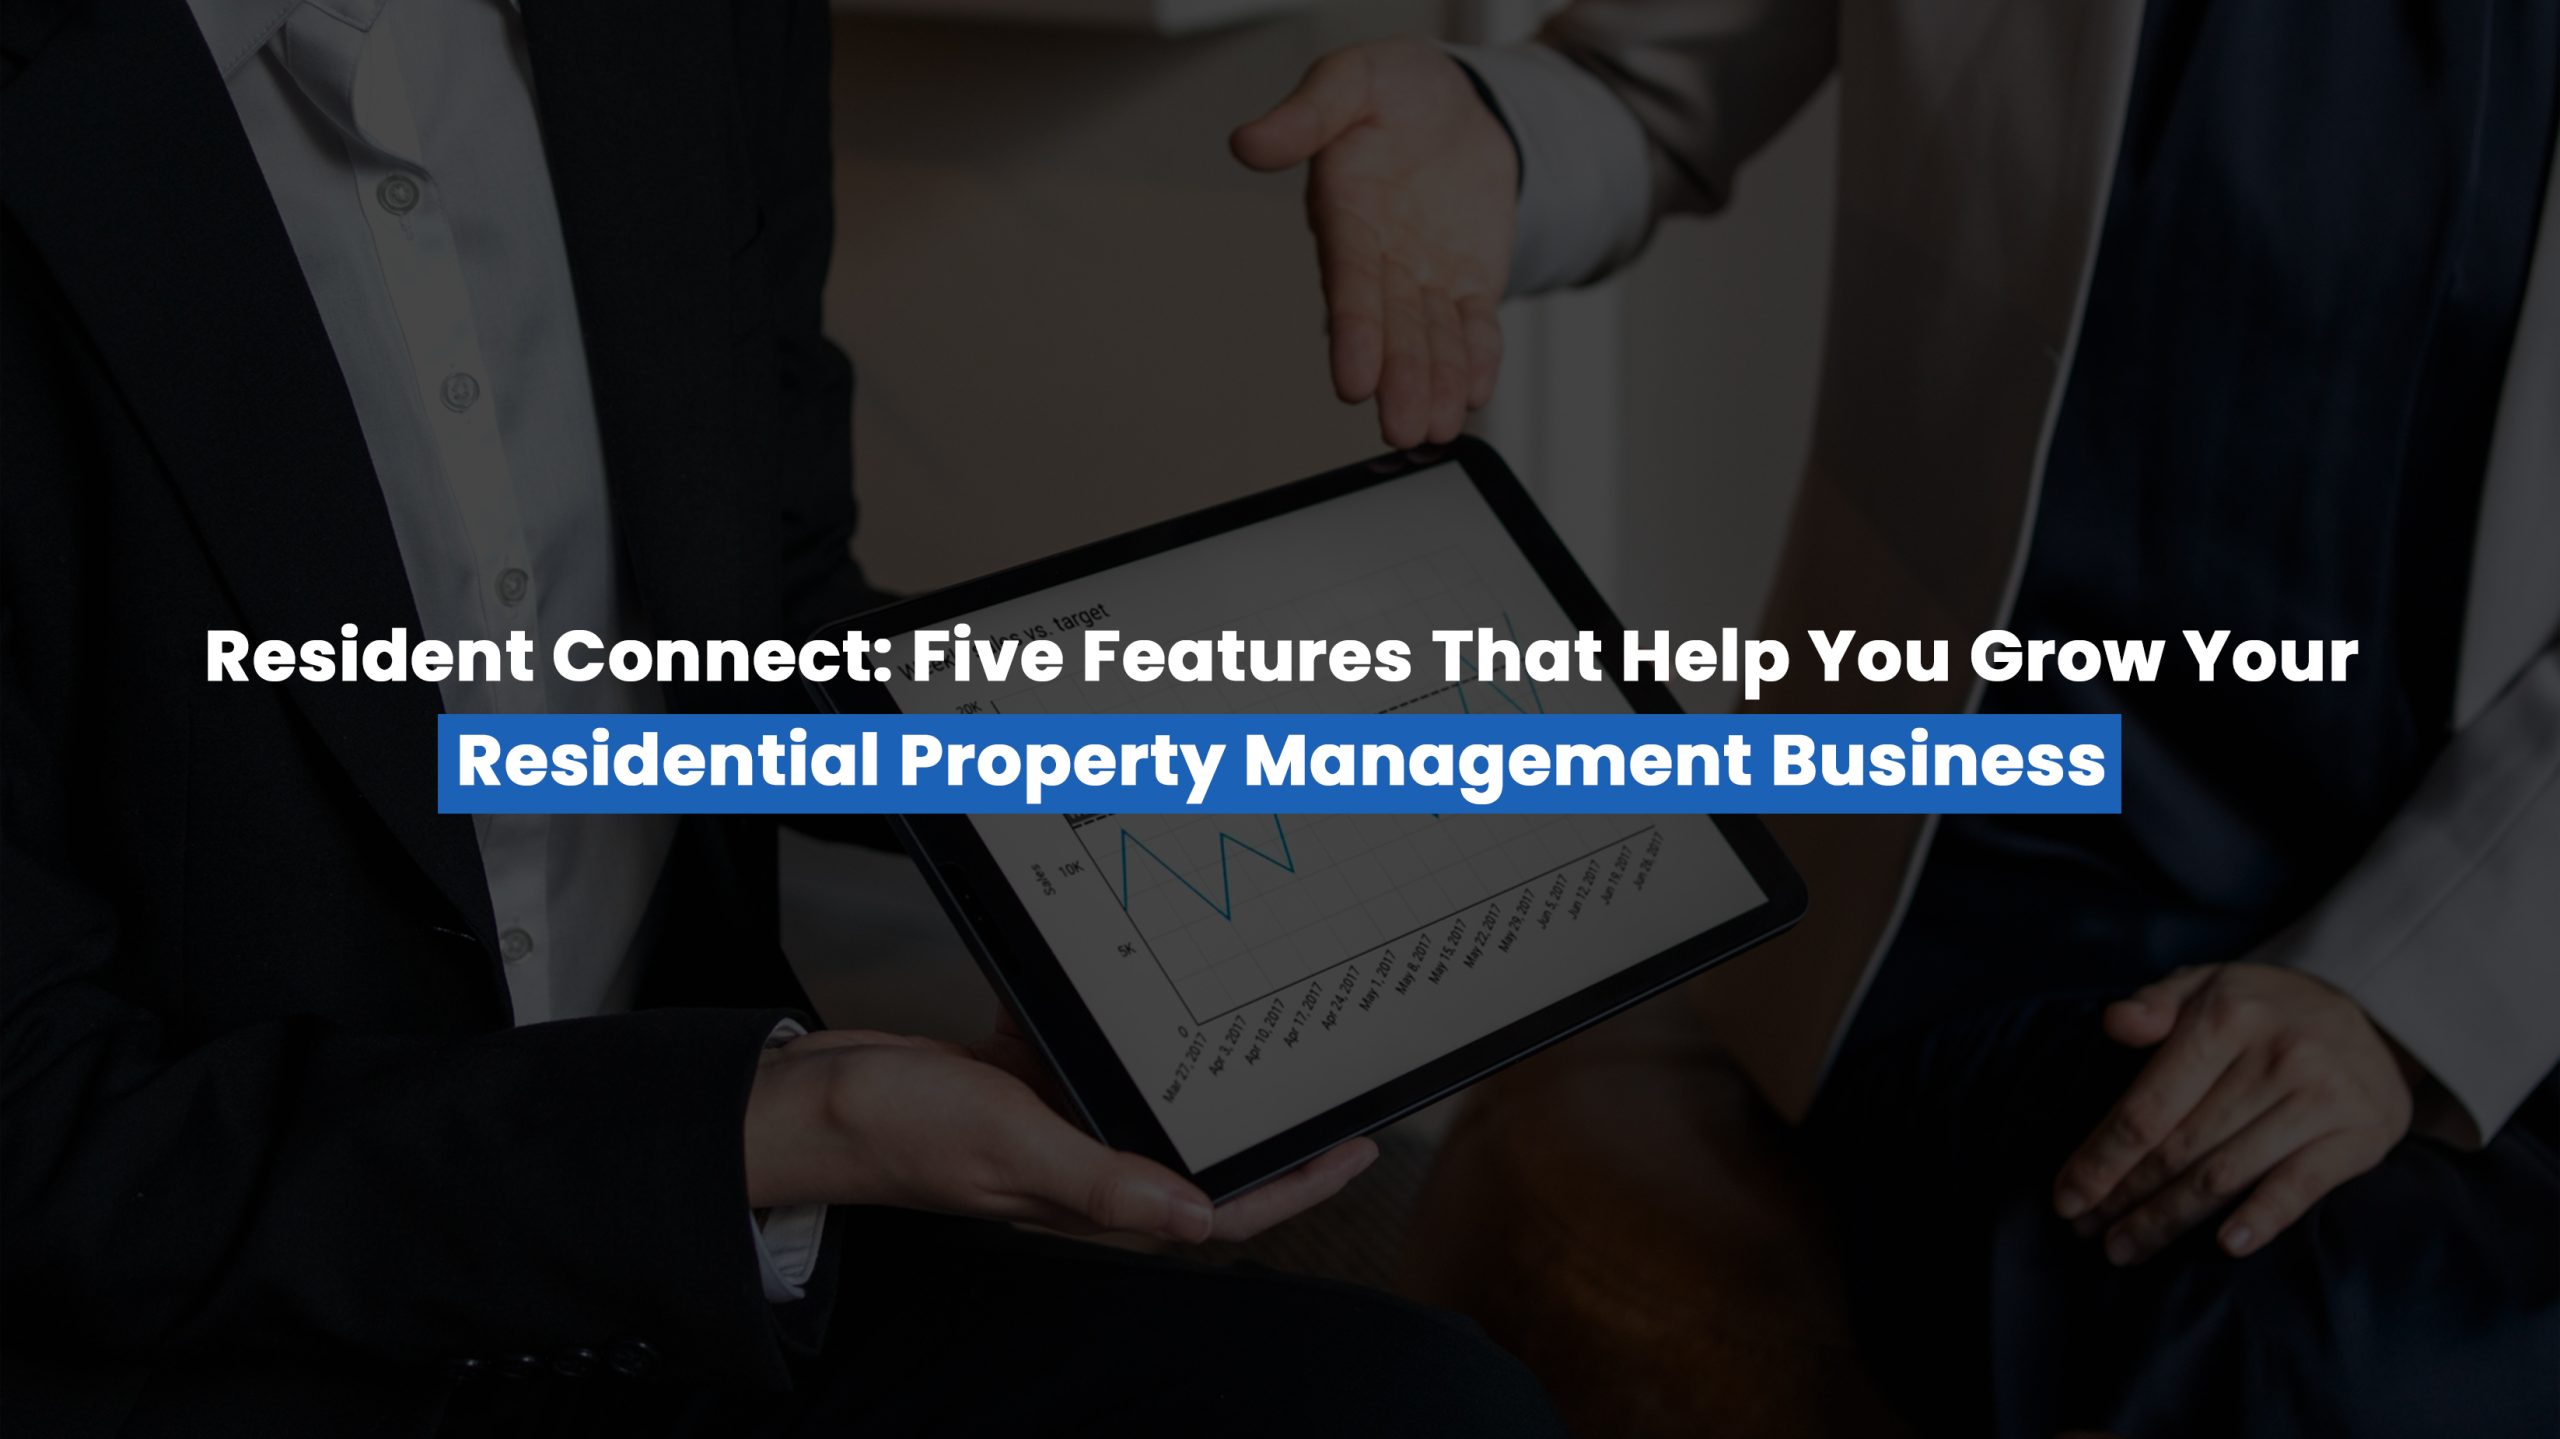 Top five features that help you grow your residential property management business with the best property management software from Resident Connect.